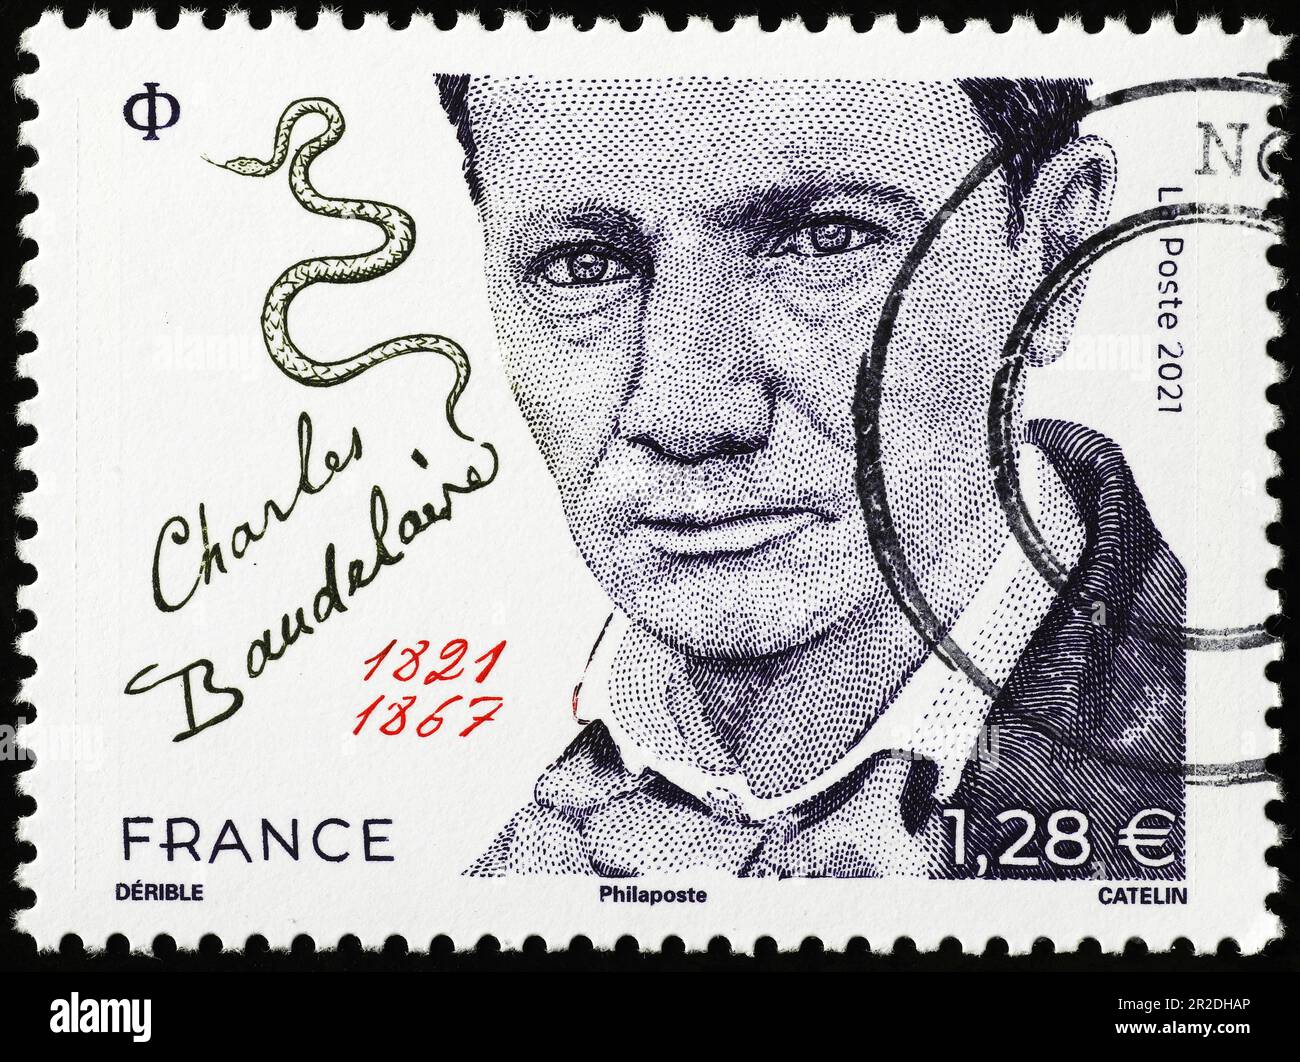 Charles Baudelaire portrait on french postage stamp Stock Photo - Alamy